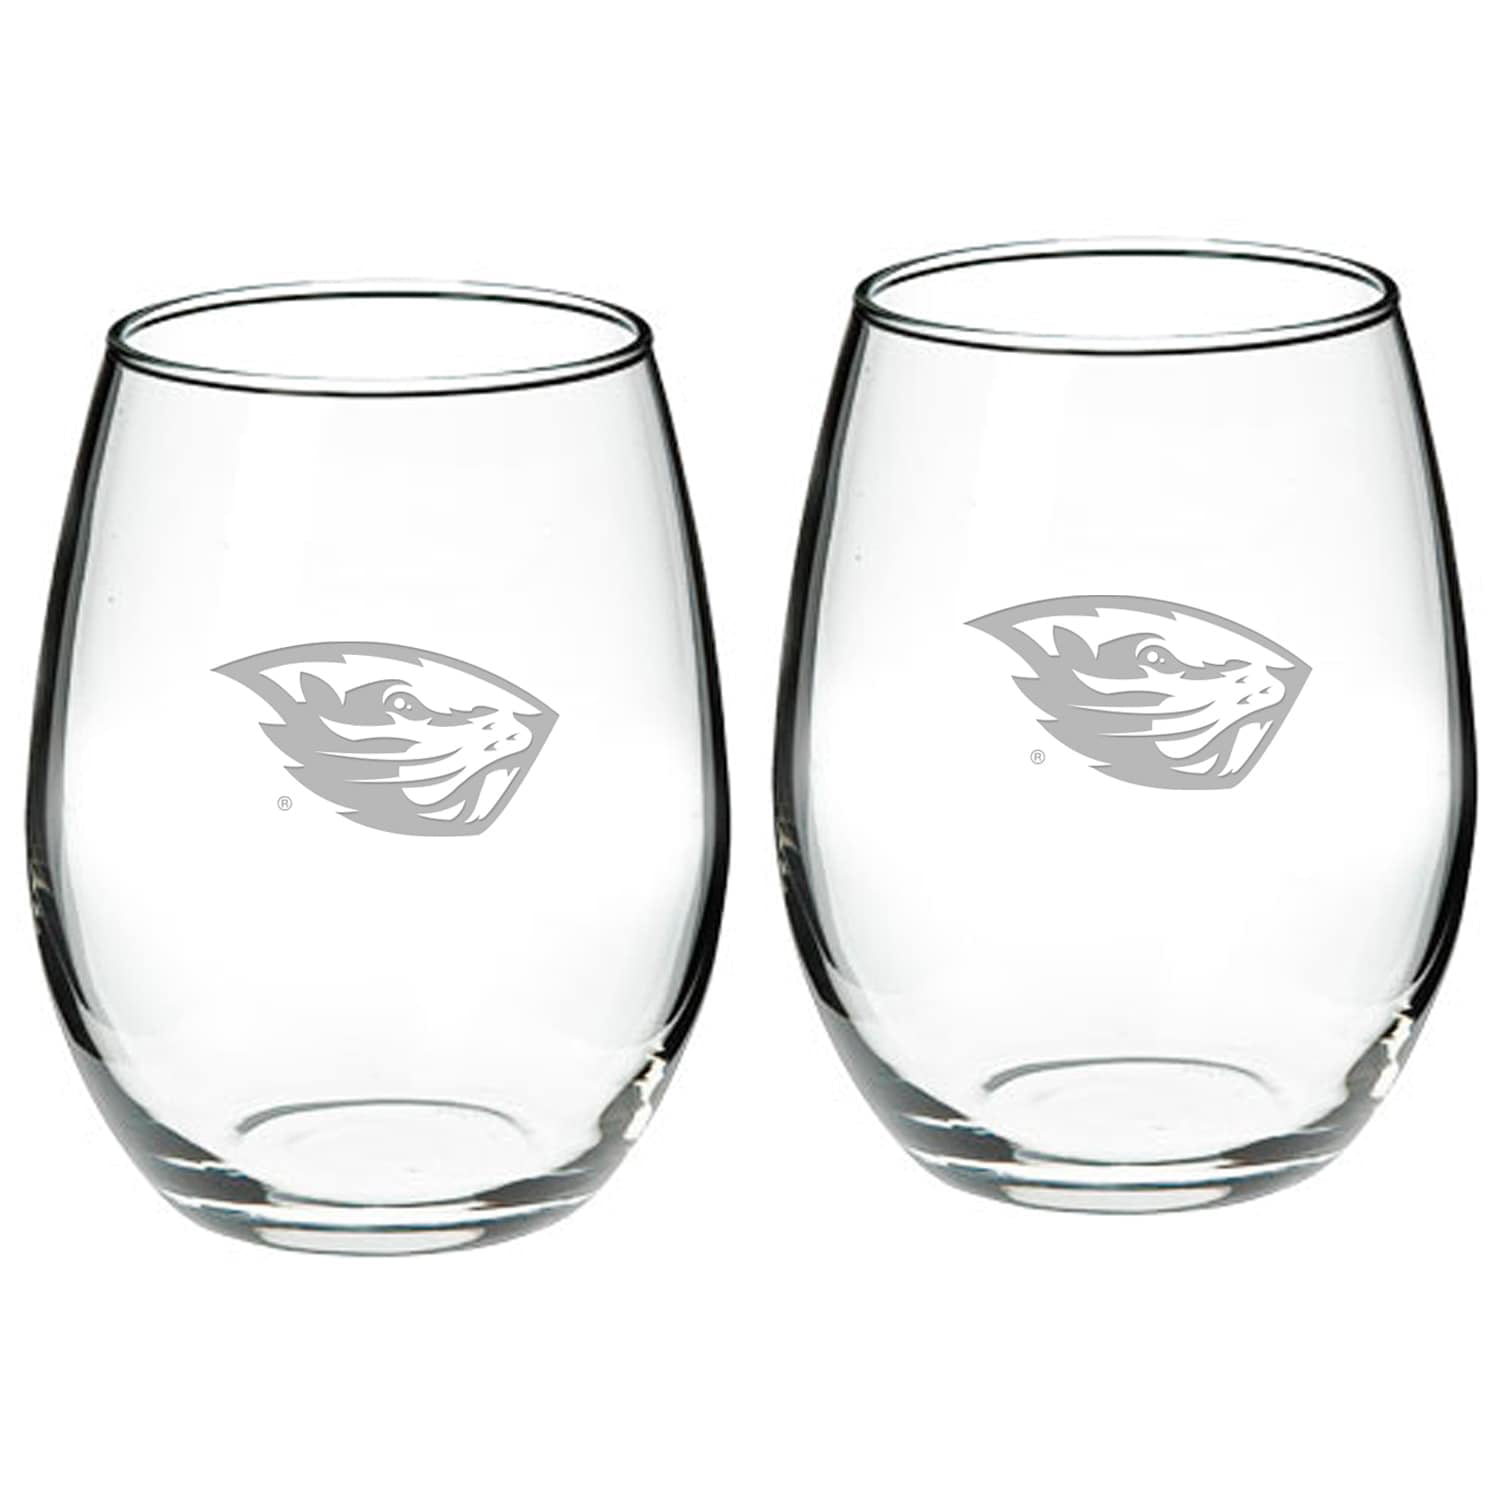 University Glass NCAA Utah Utes Adult Set of 2-12 oz White Wine Glasses Deep Etch Engraved One Size Clear 